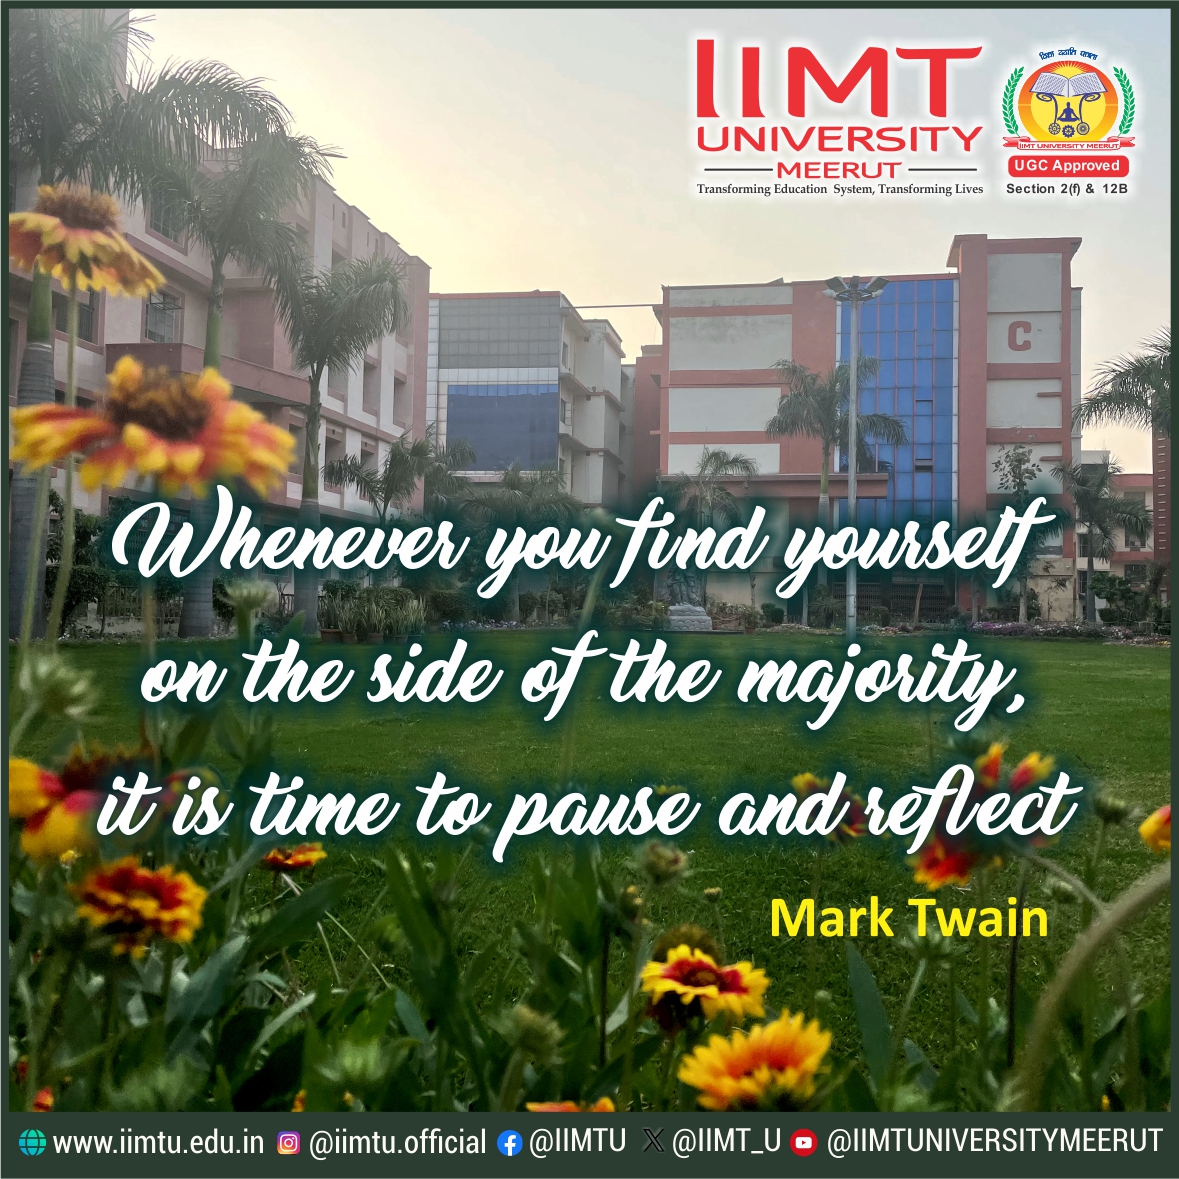 “Whenever you find yourself on the side of the majority, it is time to pause and reflect.” —Mark Twain

#IIMTUthoughtspot #QuoteofTheDay #TuesdayThoughts 

#IIMTU #TransformingEducationSystem #TransformingLives 

🌐iimtu.edu.in  📱+91-9045954124 

#AdmissionsOpen2024